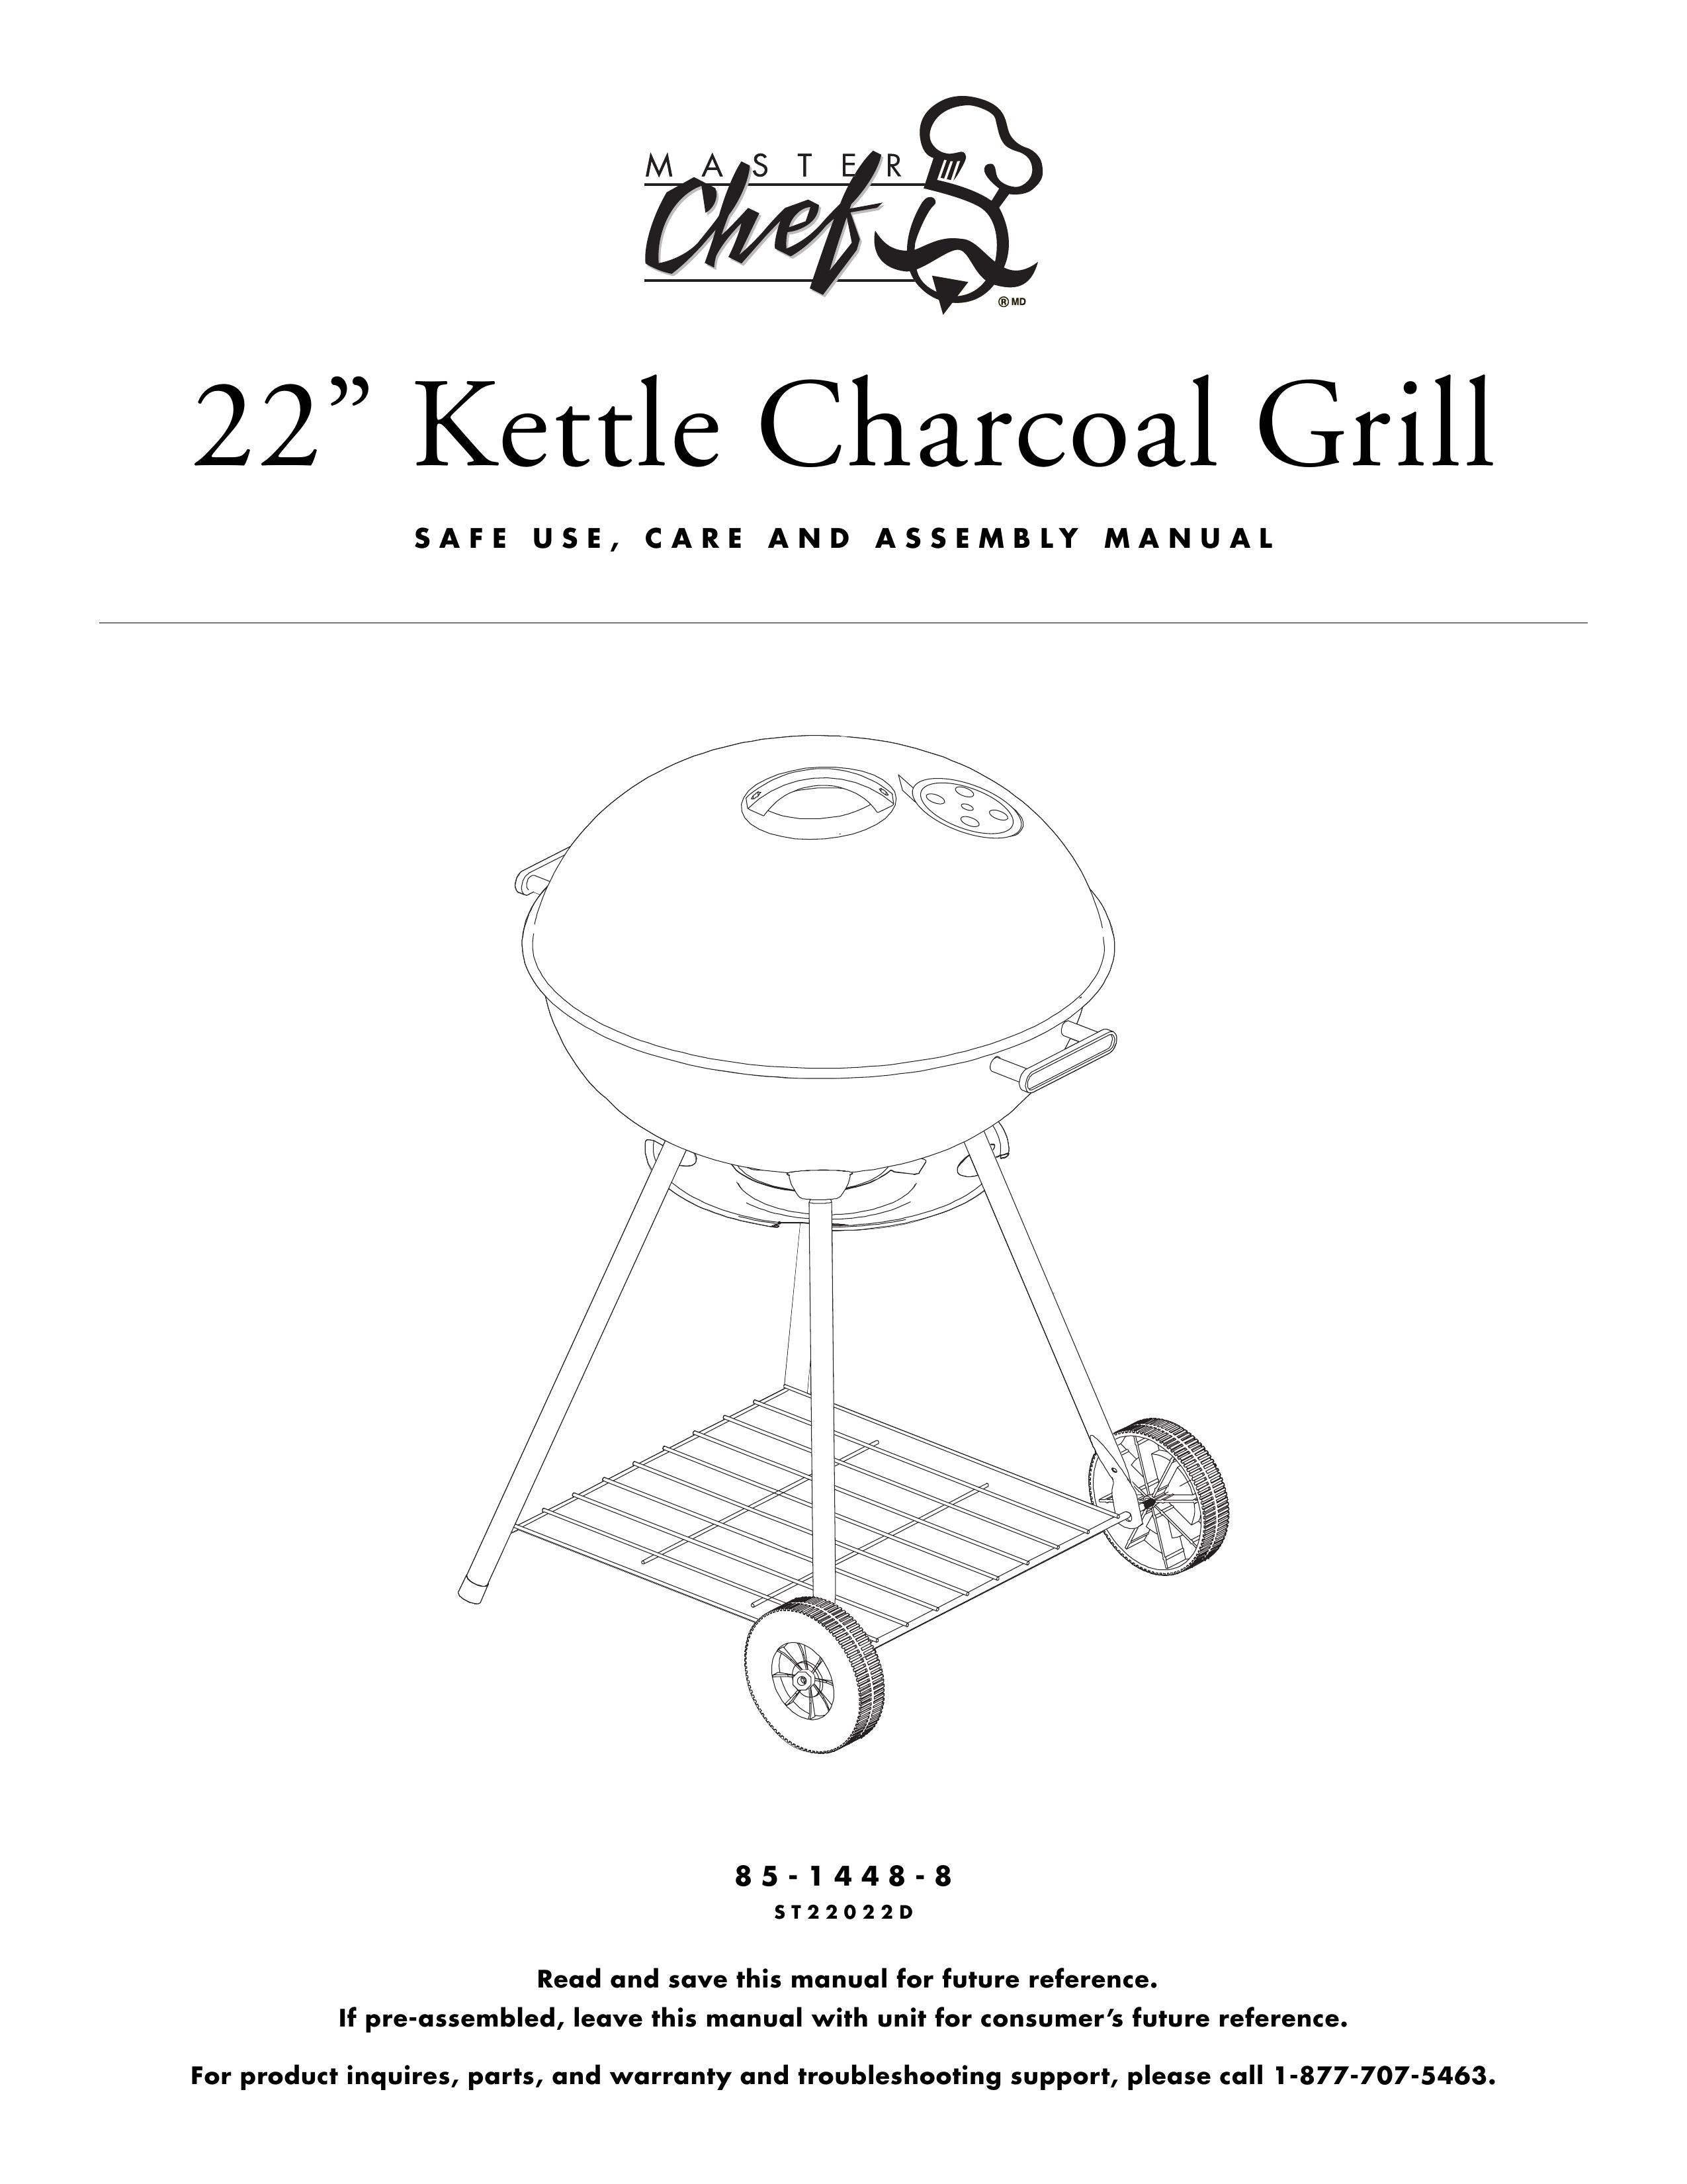 Master Chef 85-1448-8 Charcoal Grill User Manual